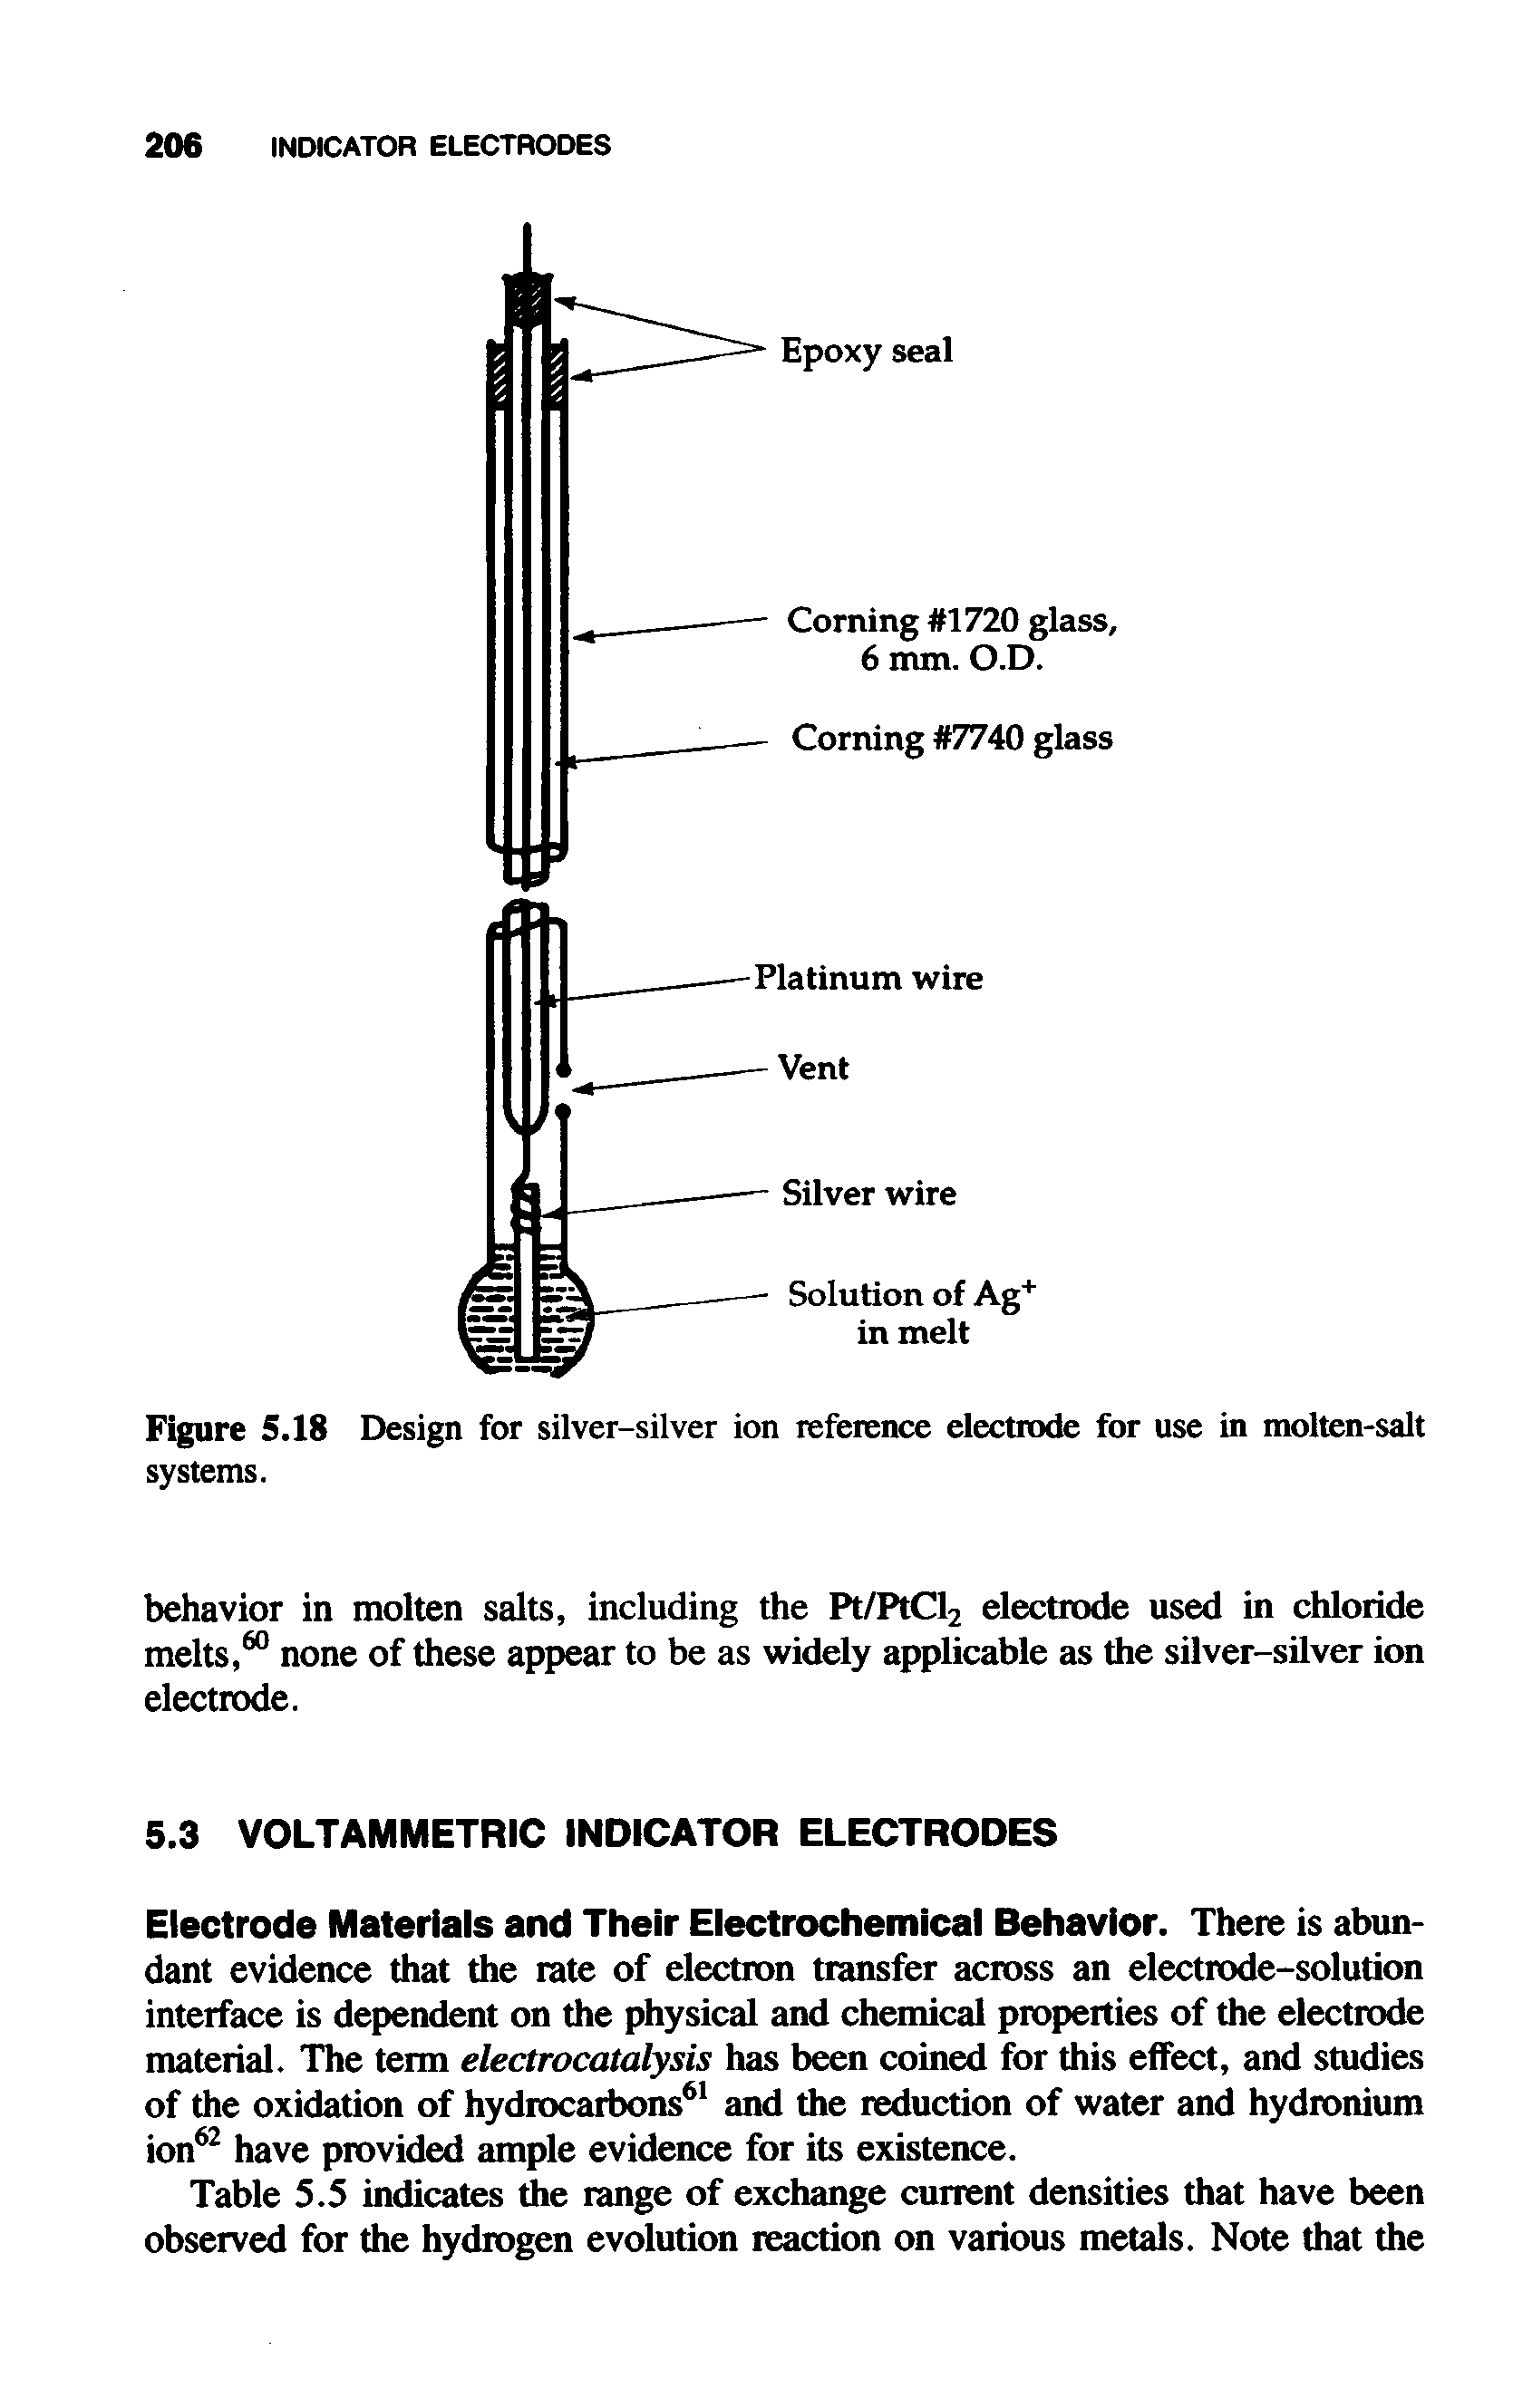 Figure 5.18 Design for silver-silver ion reference electrode for use in molten-salt systems.